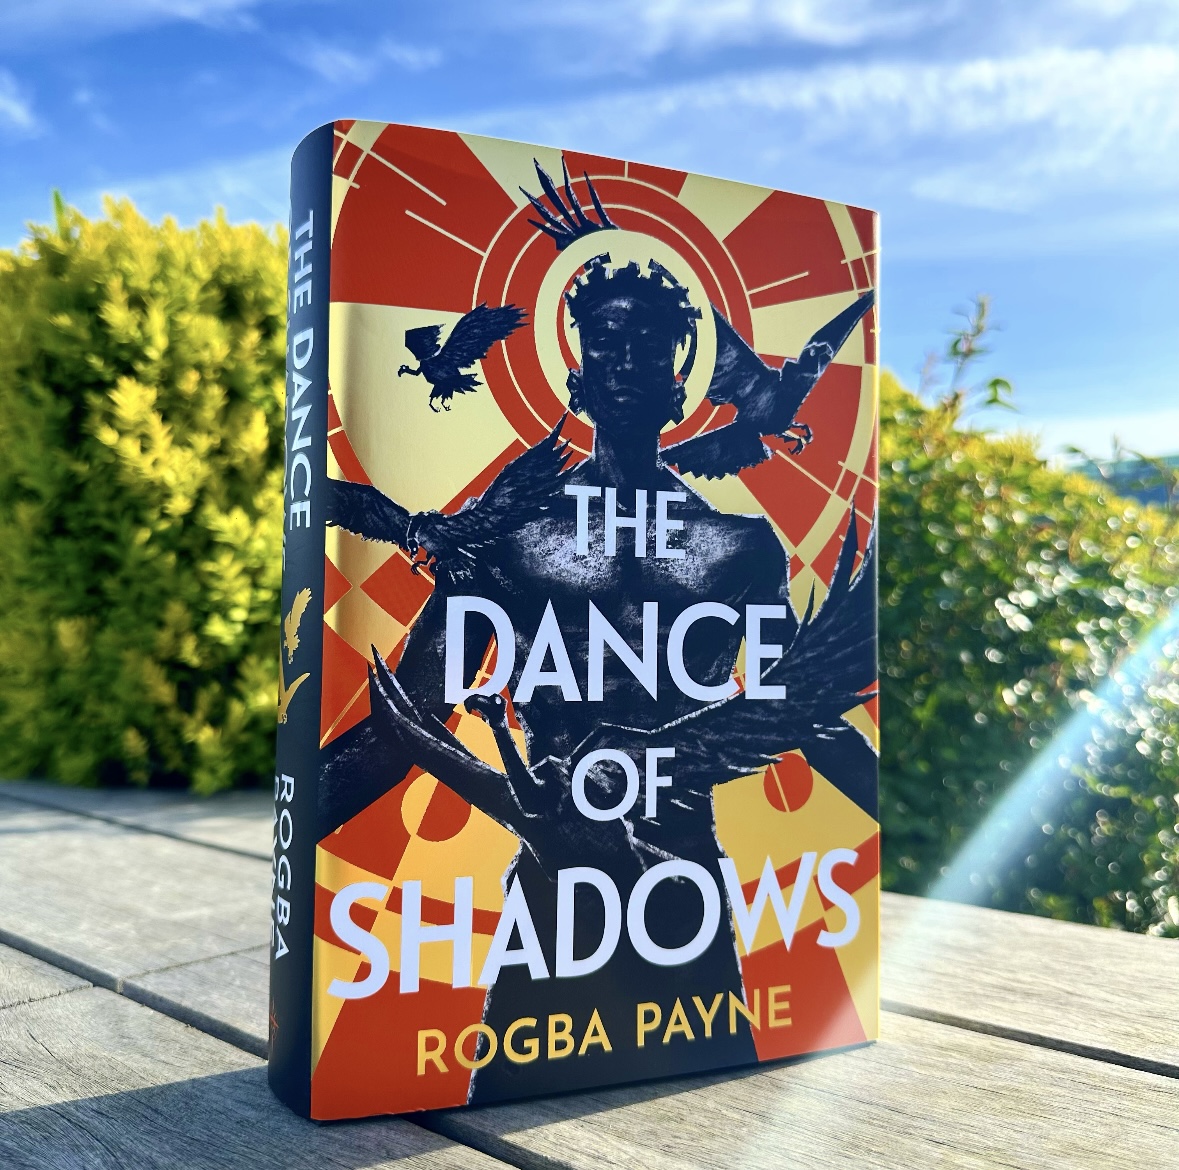 A young musician fighting for liberation is drawn into a battle between the gods. Will his thirst for vengeance jeopardise the future of his people? Enter a richly devised world of mythology, magic & music ✨ #TheDanceOfShadows by @RogbaPayne is out now: geni.us/ZWovwu